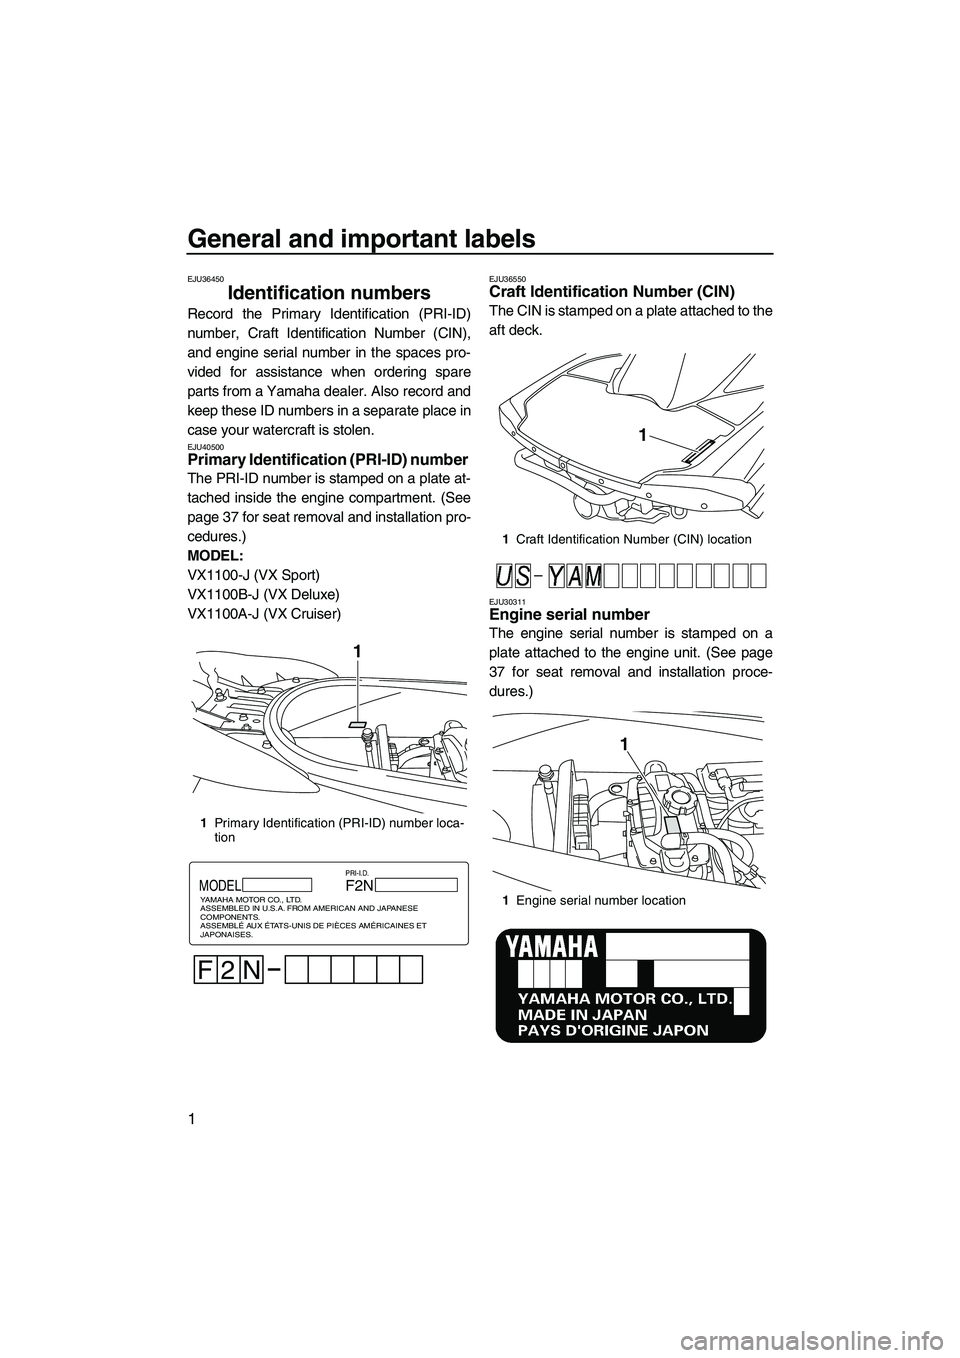 YAMAHA VX DELUXE 2010  Owners Manual General and important labels
1
EJU36450
Identification numbers 
Record the Primary Identification (PRI-ID)
number, Craft Identification Number (CIN),
and engine serial number in the spaces pro-
vided 